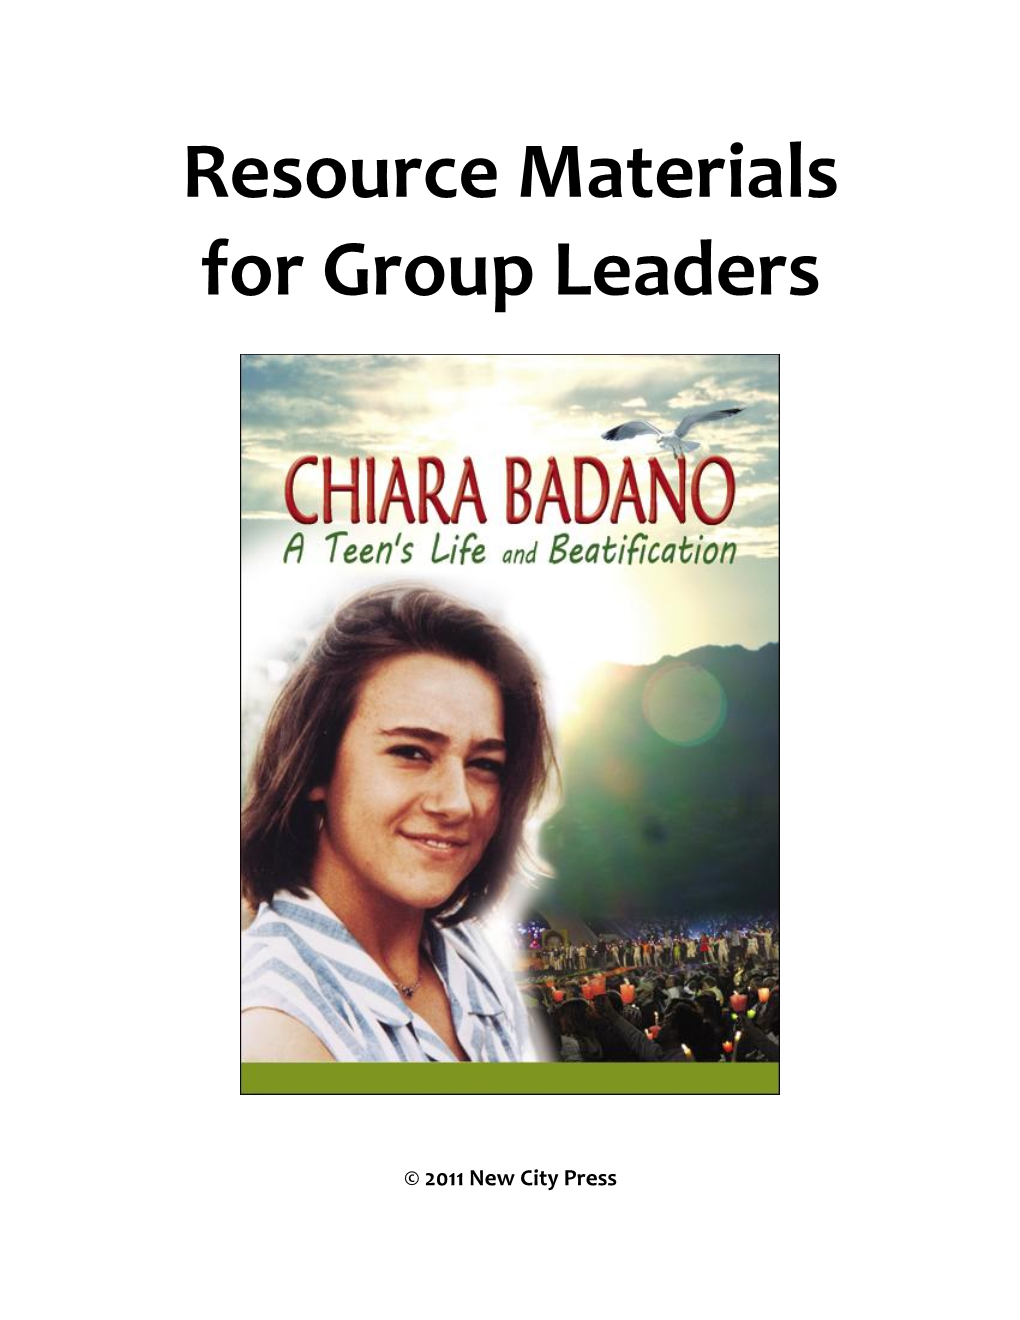 Resource Materials for Group Leaders